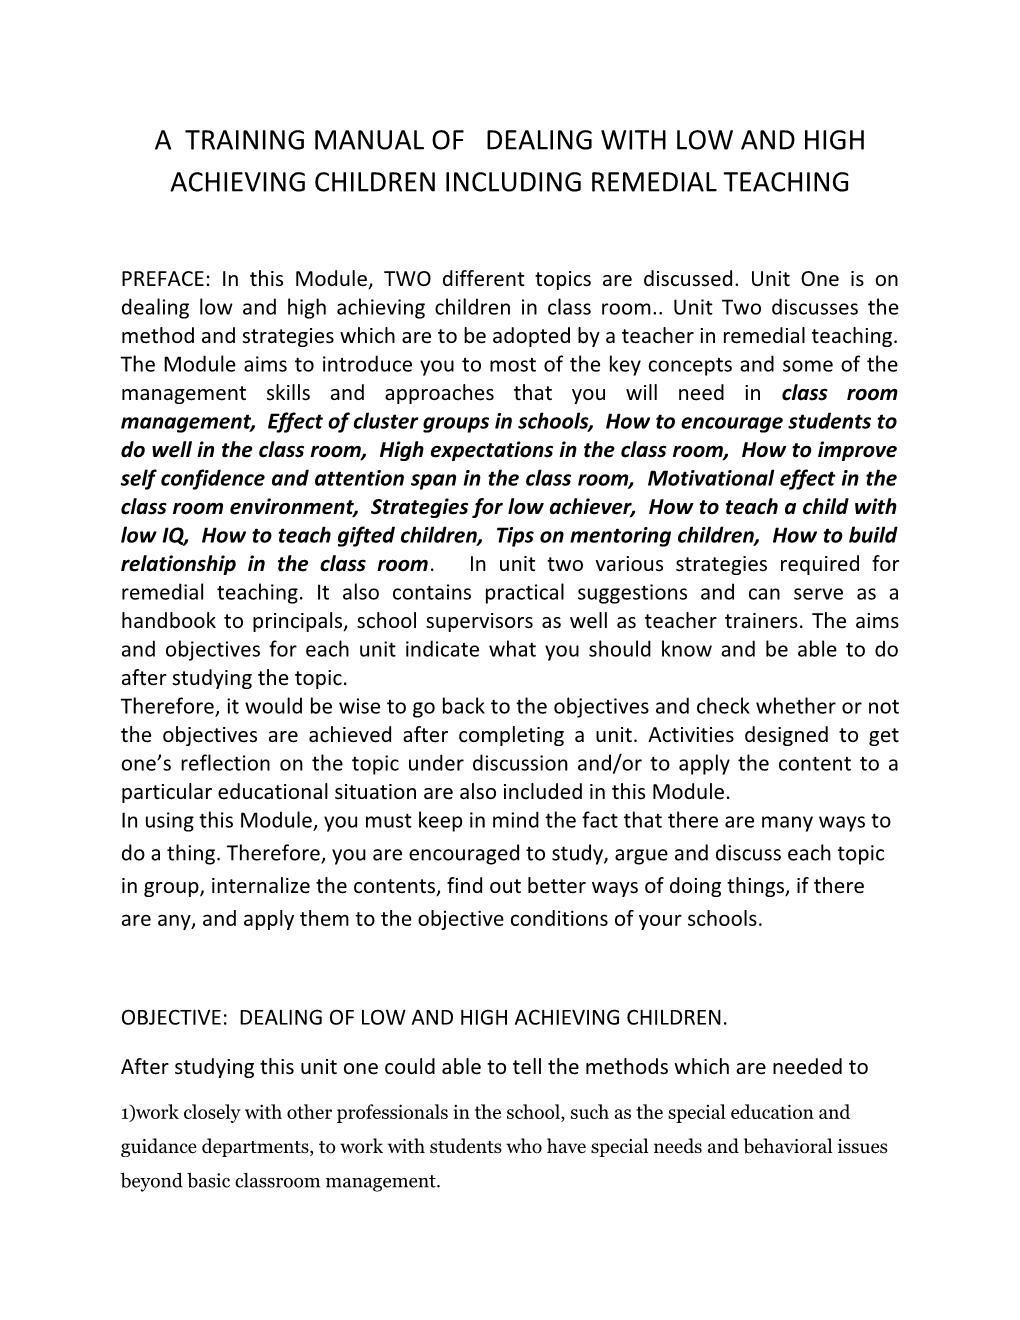 A Training Manual of Dealing with Low and High Achieving Children Including Remedial Teaching